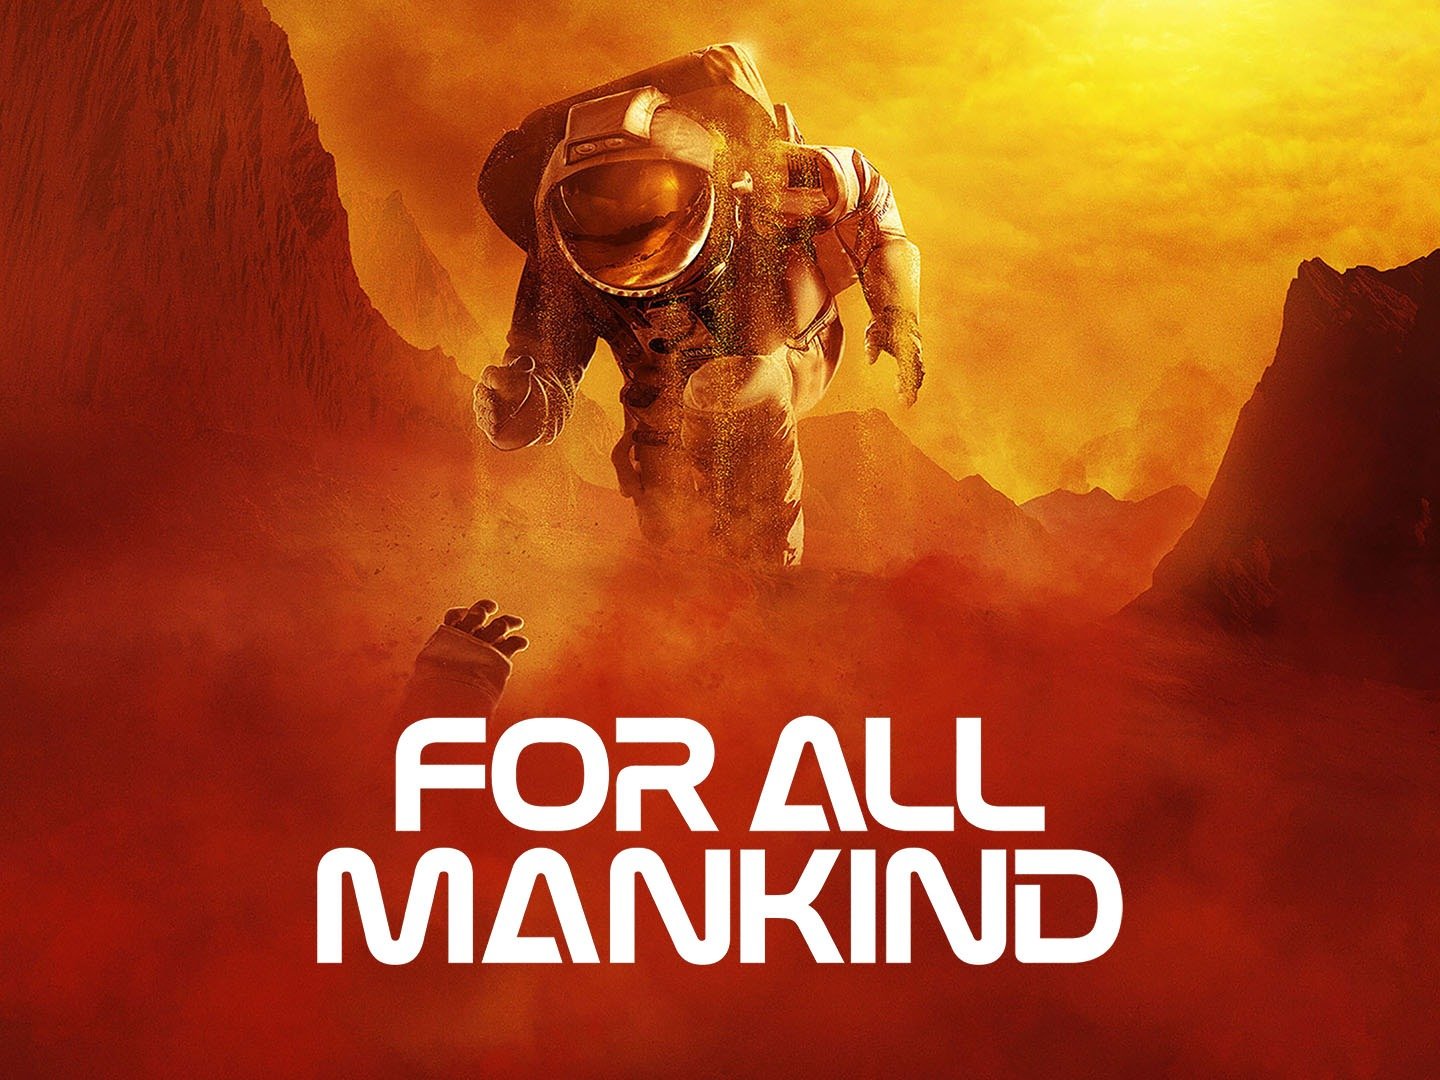 For All Mankind - Trailers & Videos - Rotten Tomatoes